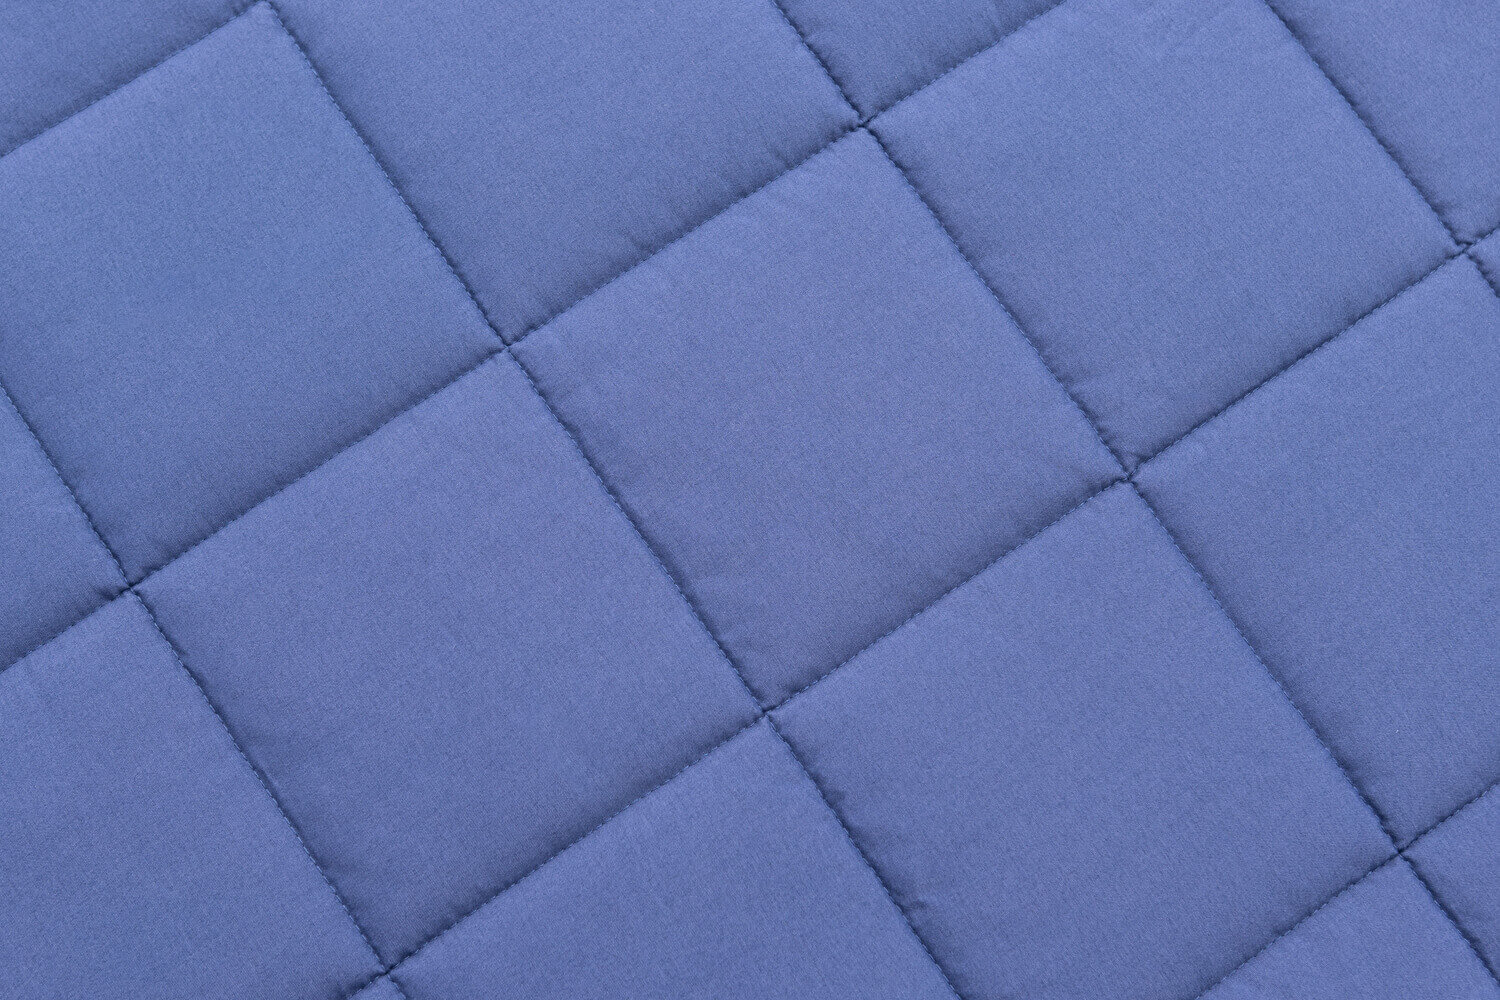 Closeup of the quilted panels and stitching on Classic Weighted Blanket 